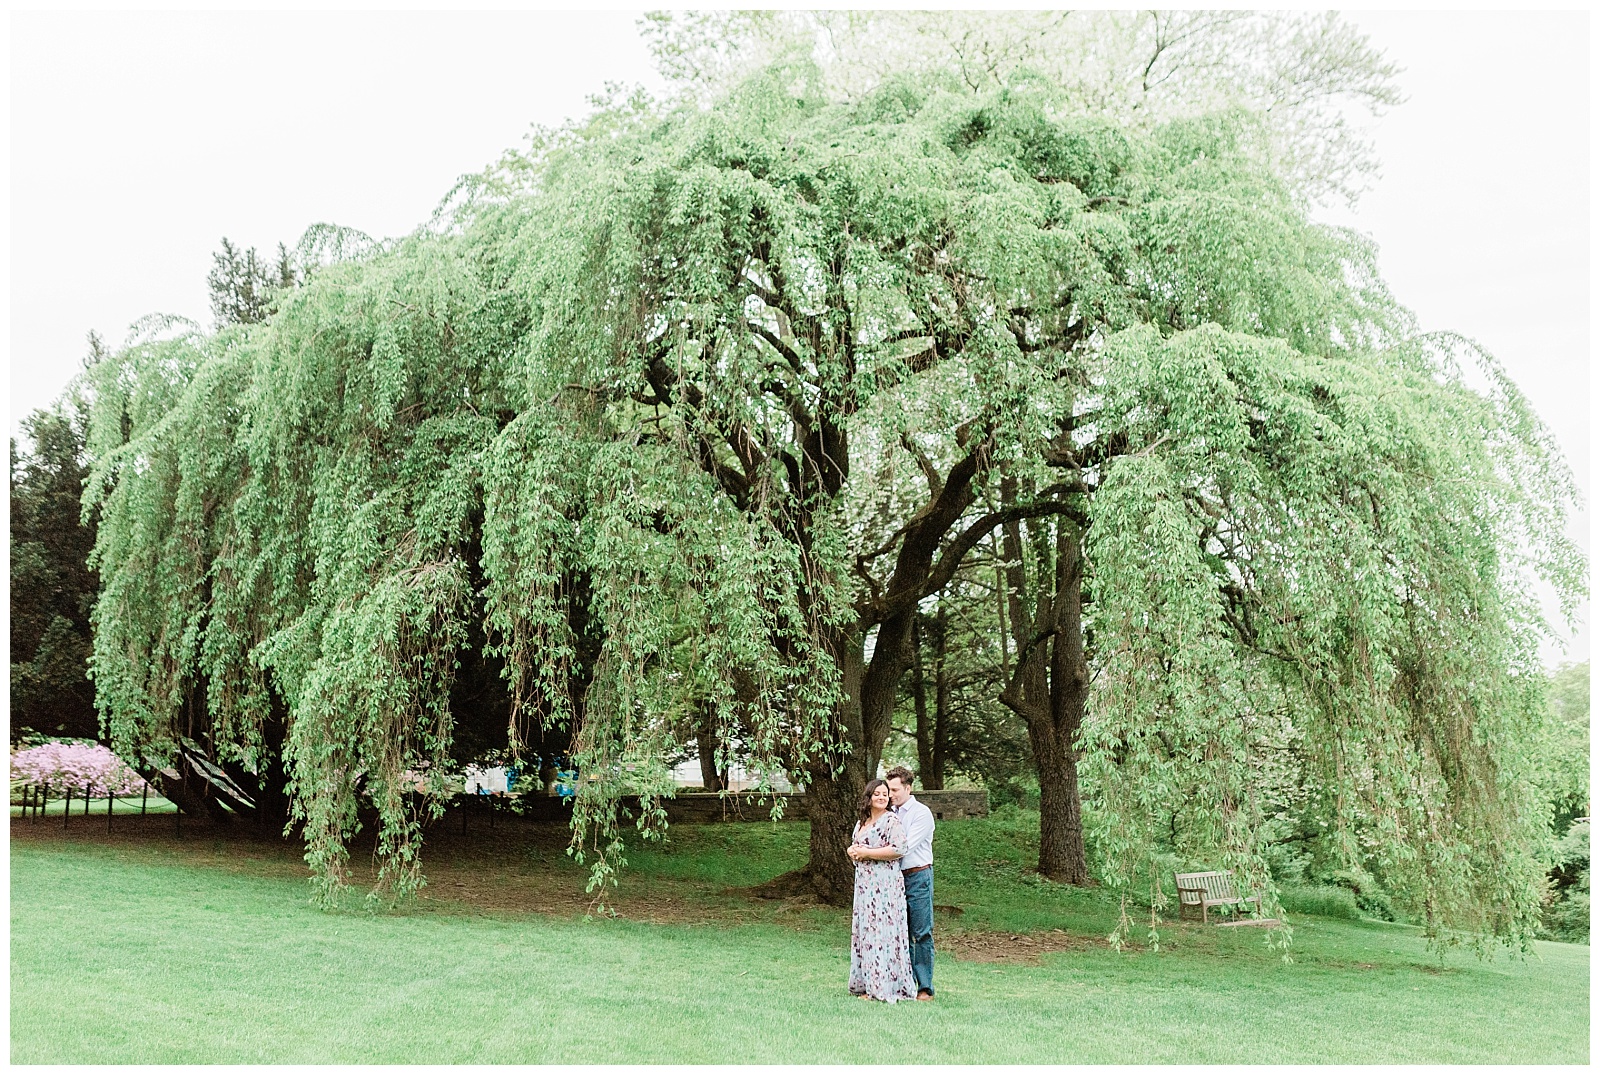 A couple poses for a photo in front of a massive willow tree.